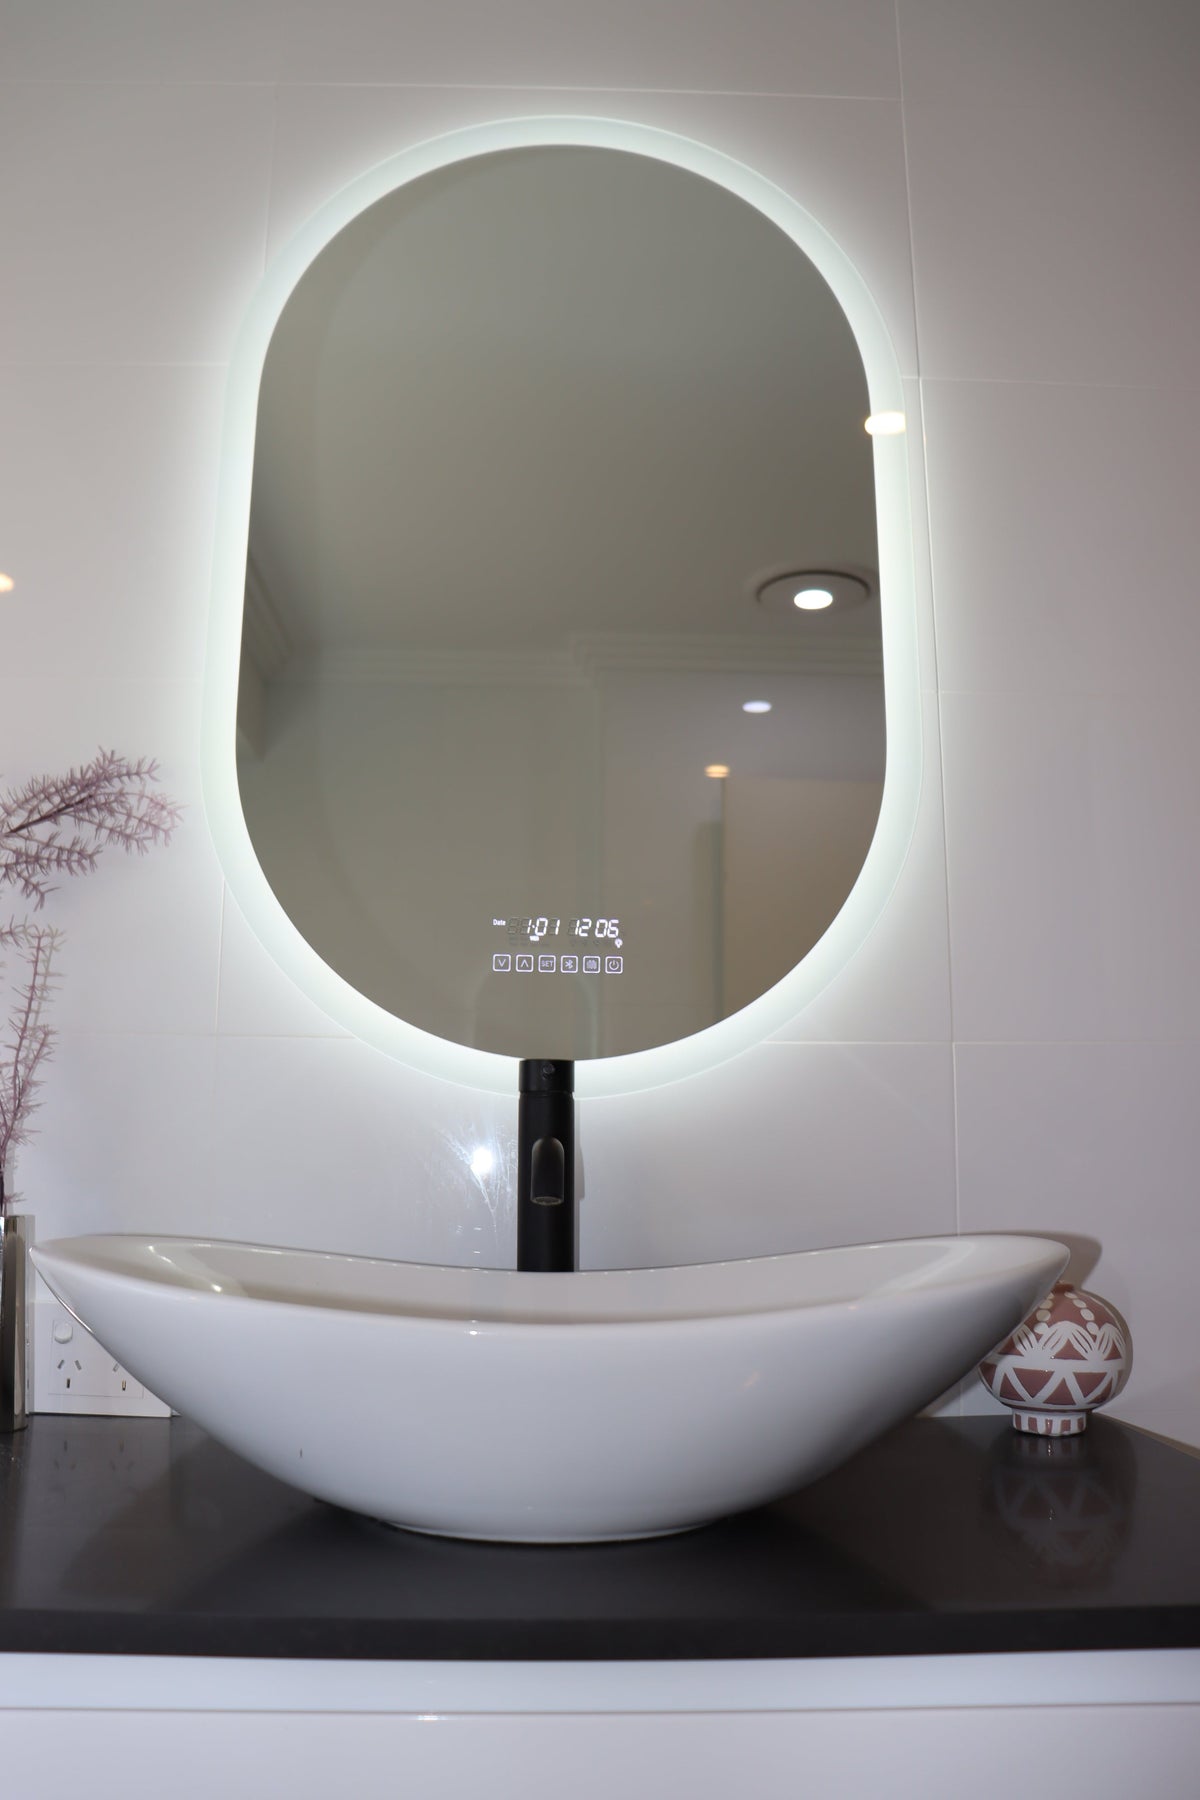 Oval Smart LED mirror emitting intense white backlit LED light, matched with white vessel sink below